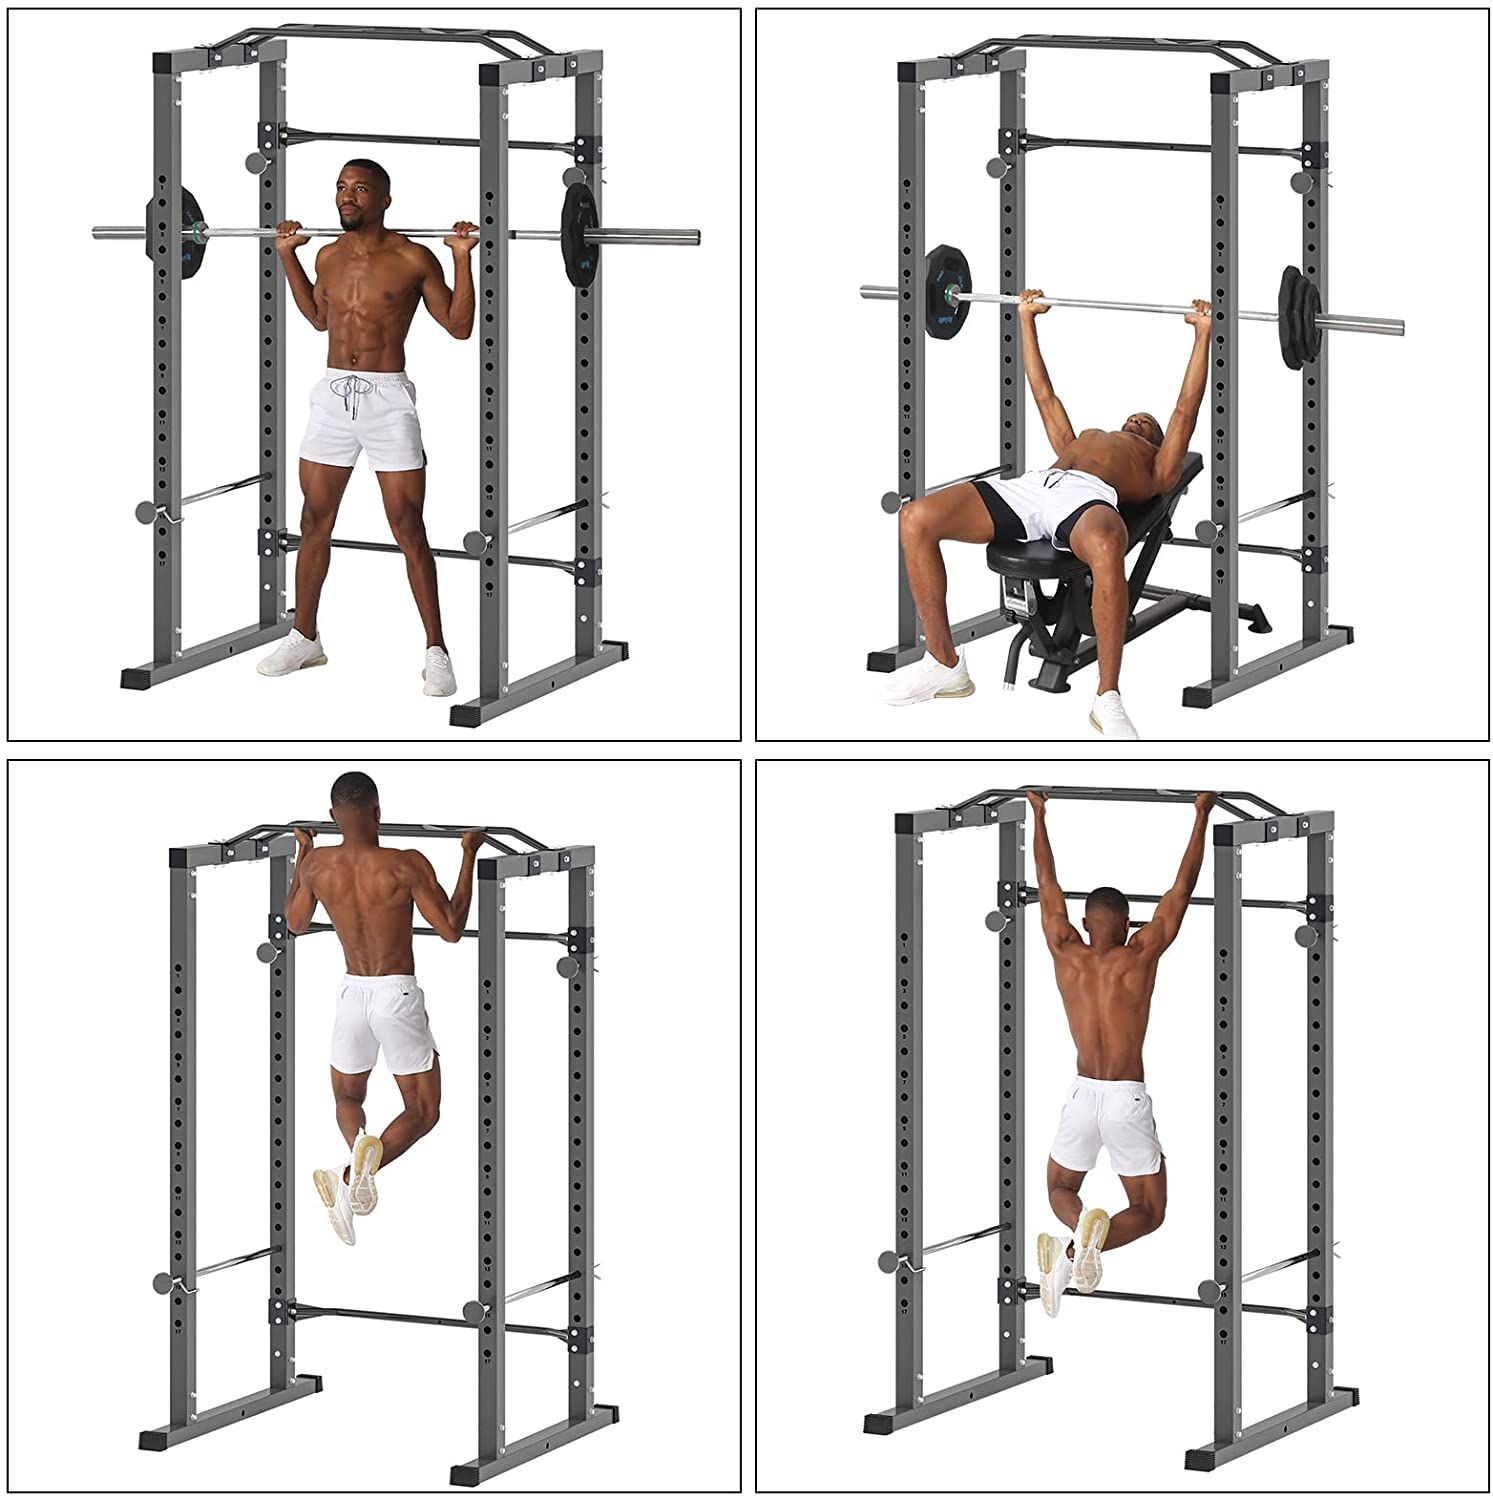 Own a Squat Rack from manufacturer in Dubai